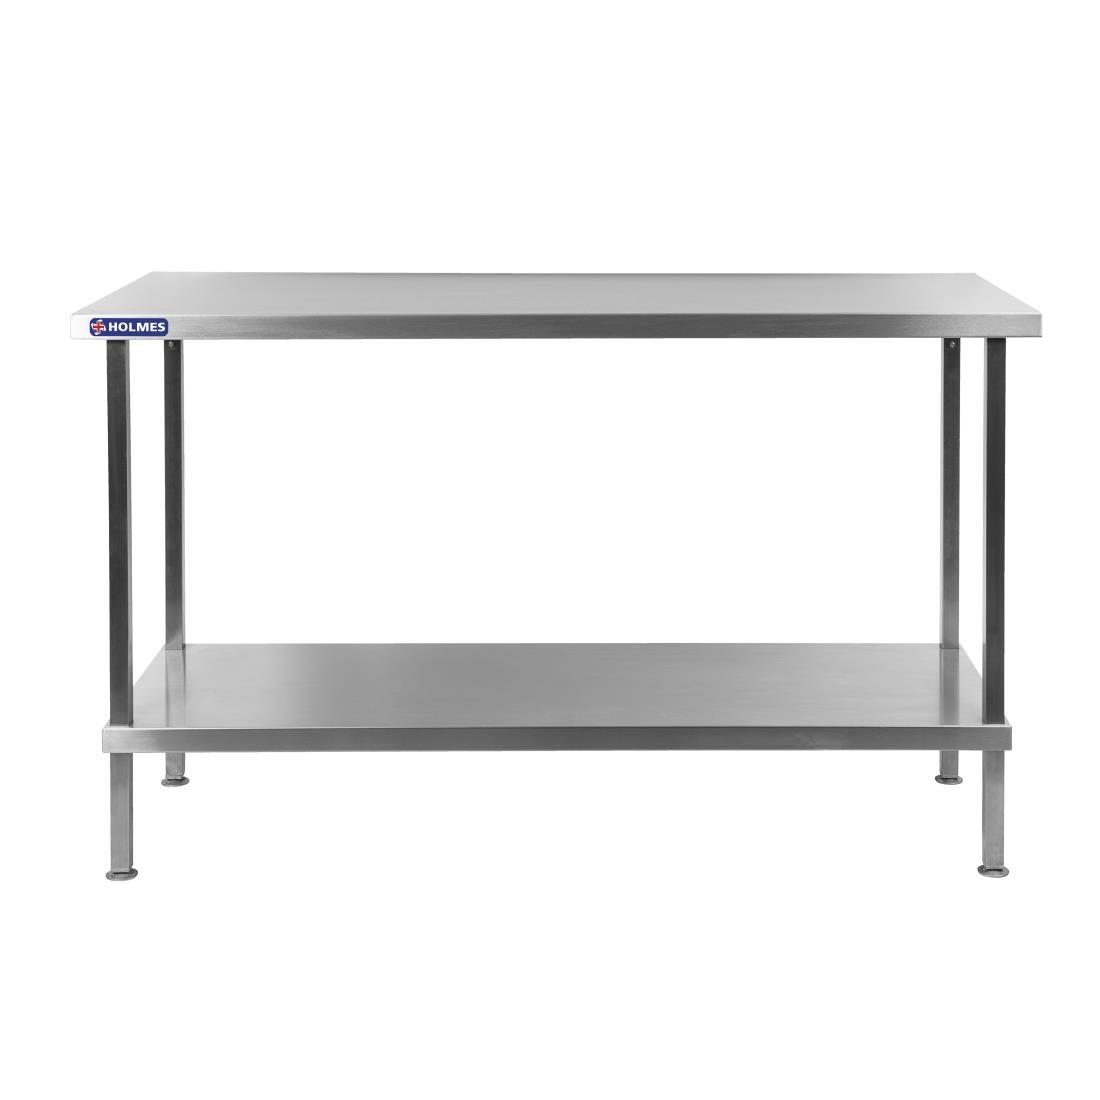 DR043 Holmes Stainless Steel Centre Table 1200mm JD Catering Equipment Solutions Ltd